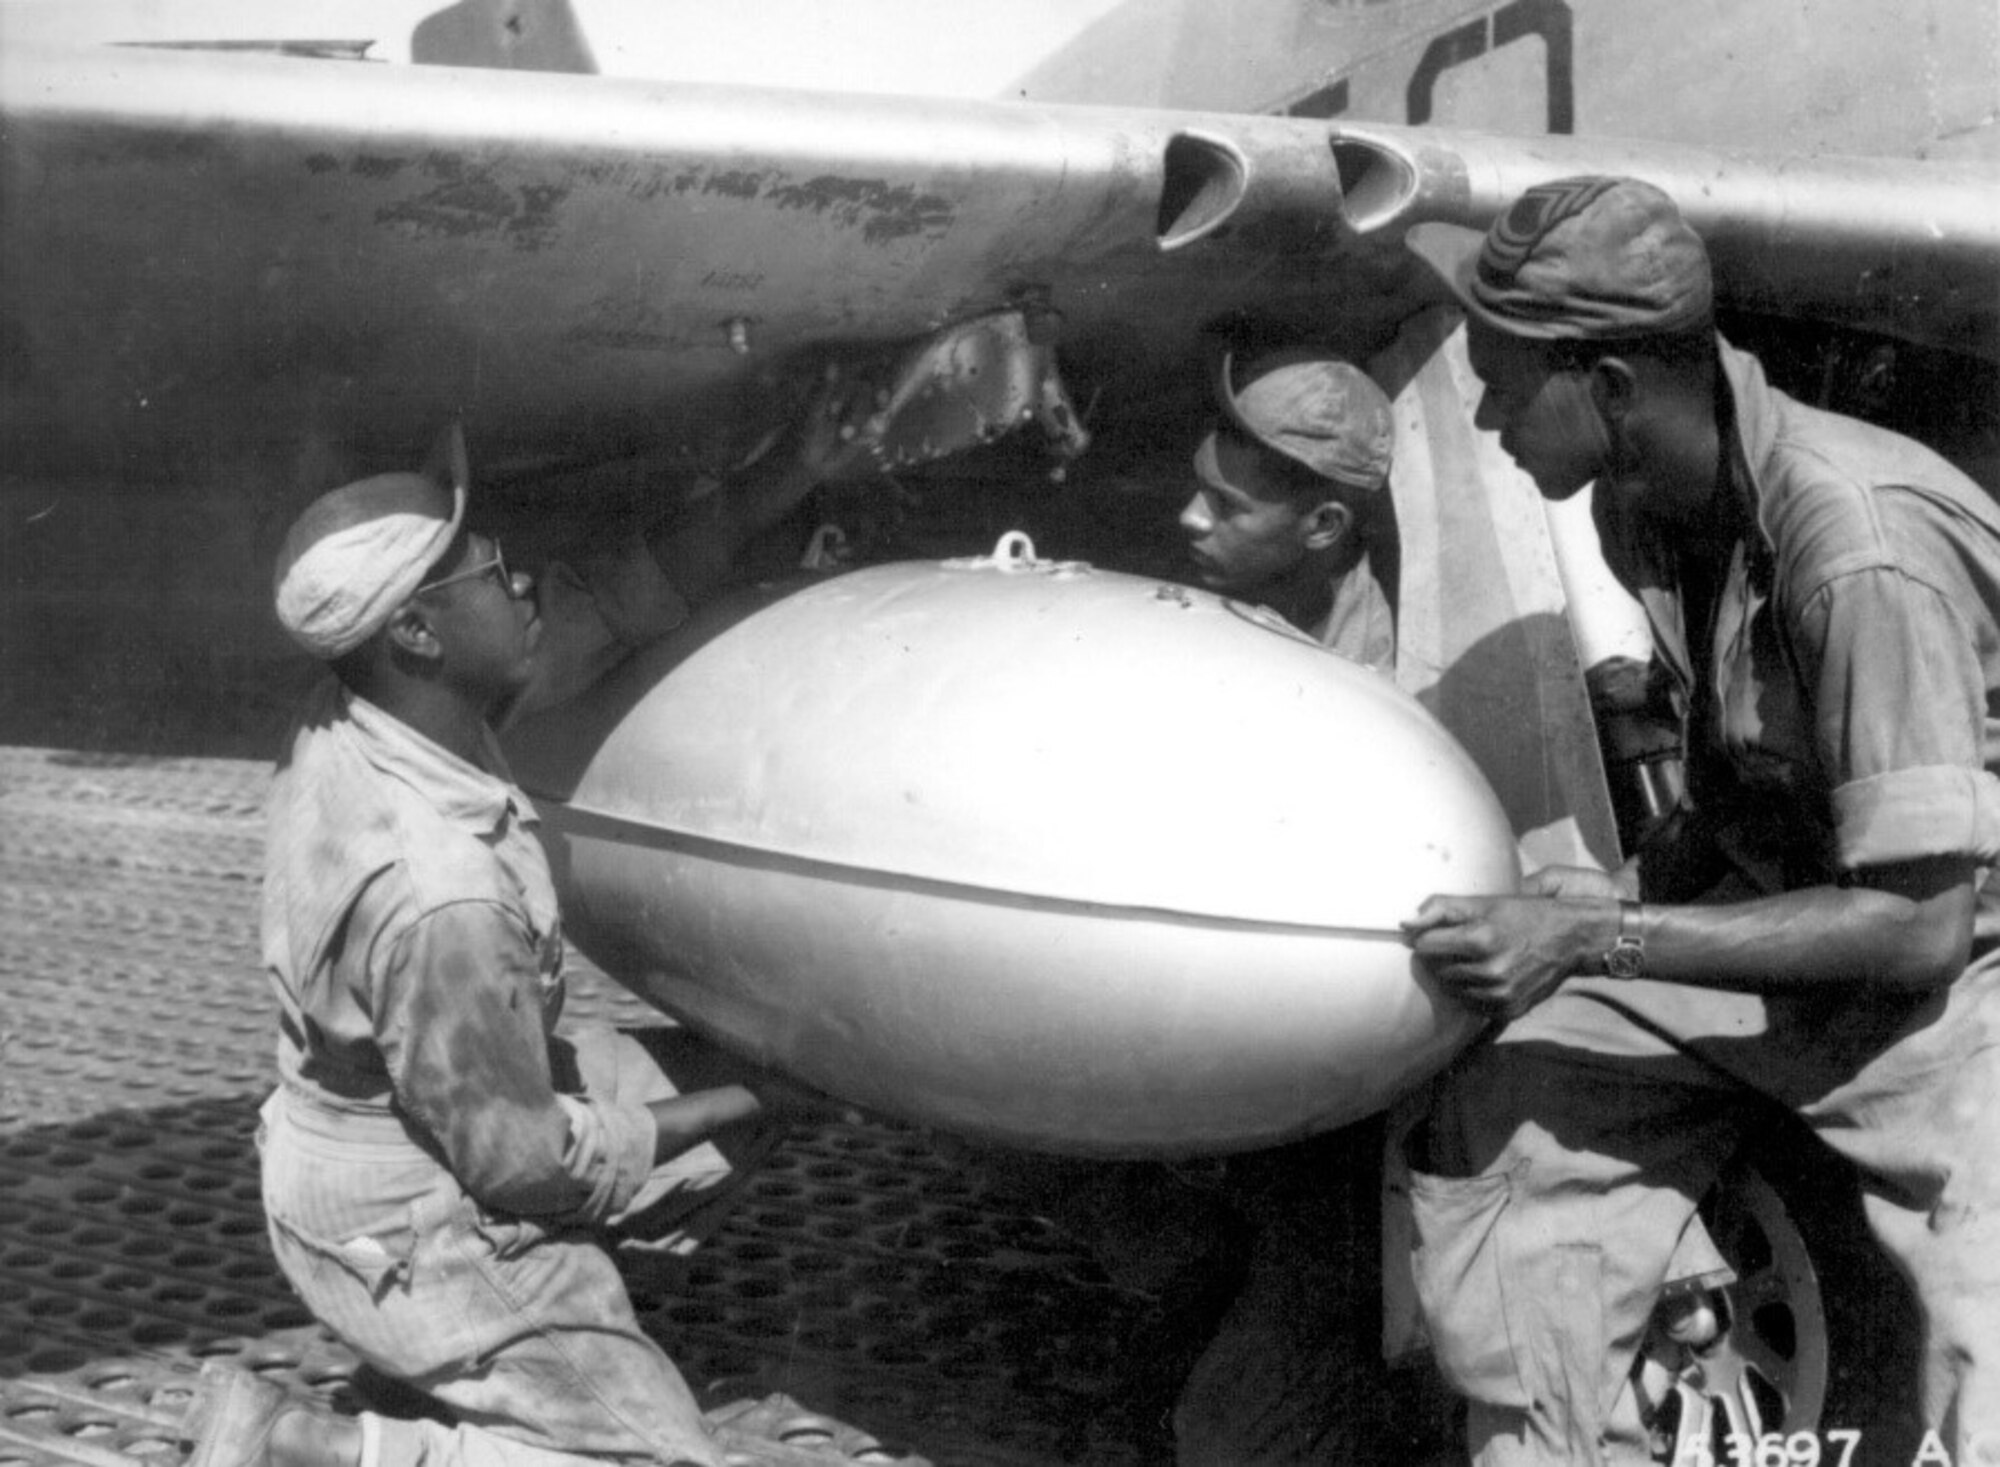 Editor’s note: photo and caption were pulled from the National Archives Catalog.
Members of the ground crew of a Negro fighter squadron of the 15th U.S. Air Force in Italy place a loaded wing tank on a P-51 Mustang before the group takes off on another mission escorting bombers over enemy targets. The squadron uses auxiliary fuel tanks for long-distance flights. Left to right: T/Sgt. Charles K. Haynes, S/Sgt. James A. Sheppard, and M/Sgt. Frank Bradley. N.d. 208-AA-49E-1-3.